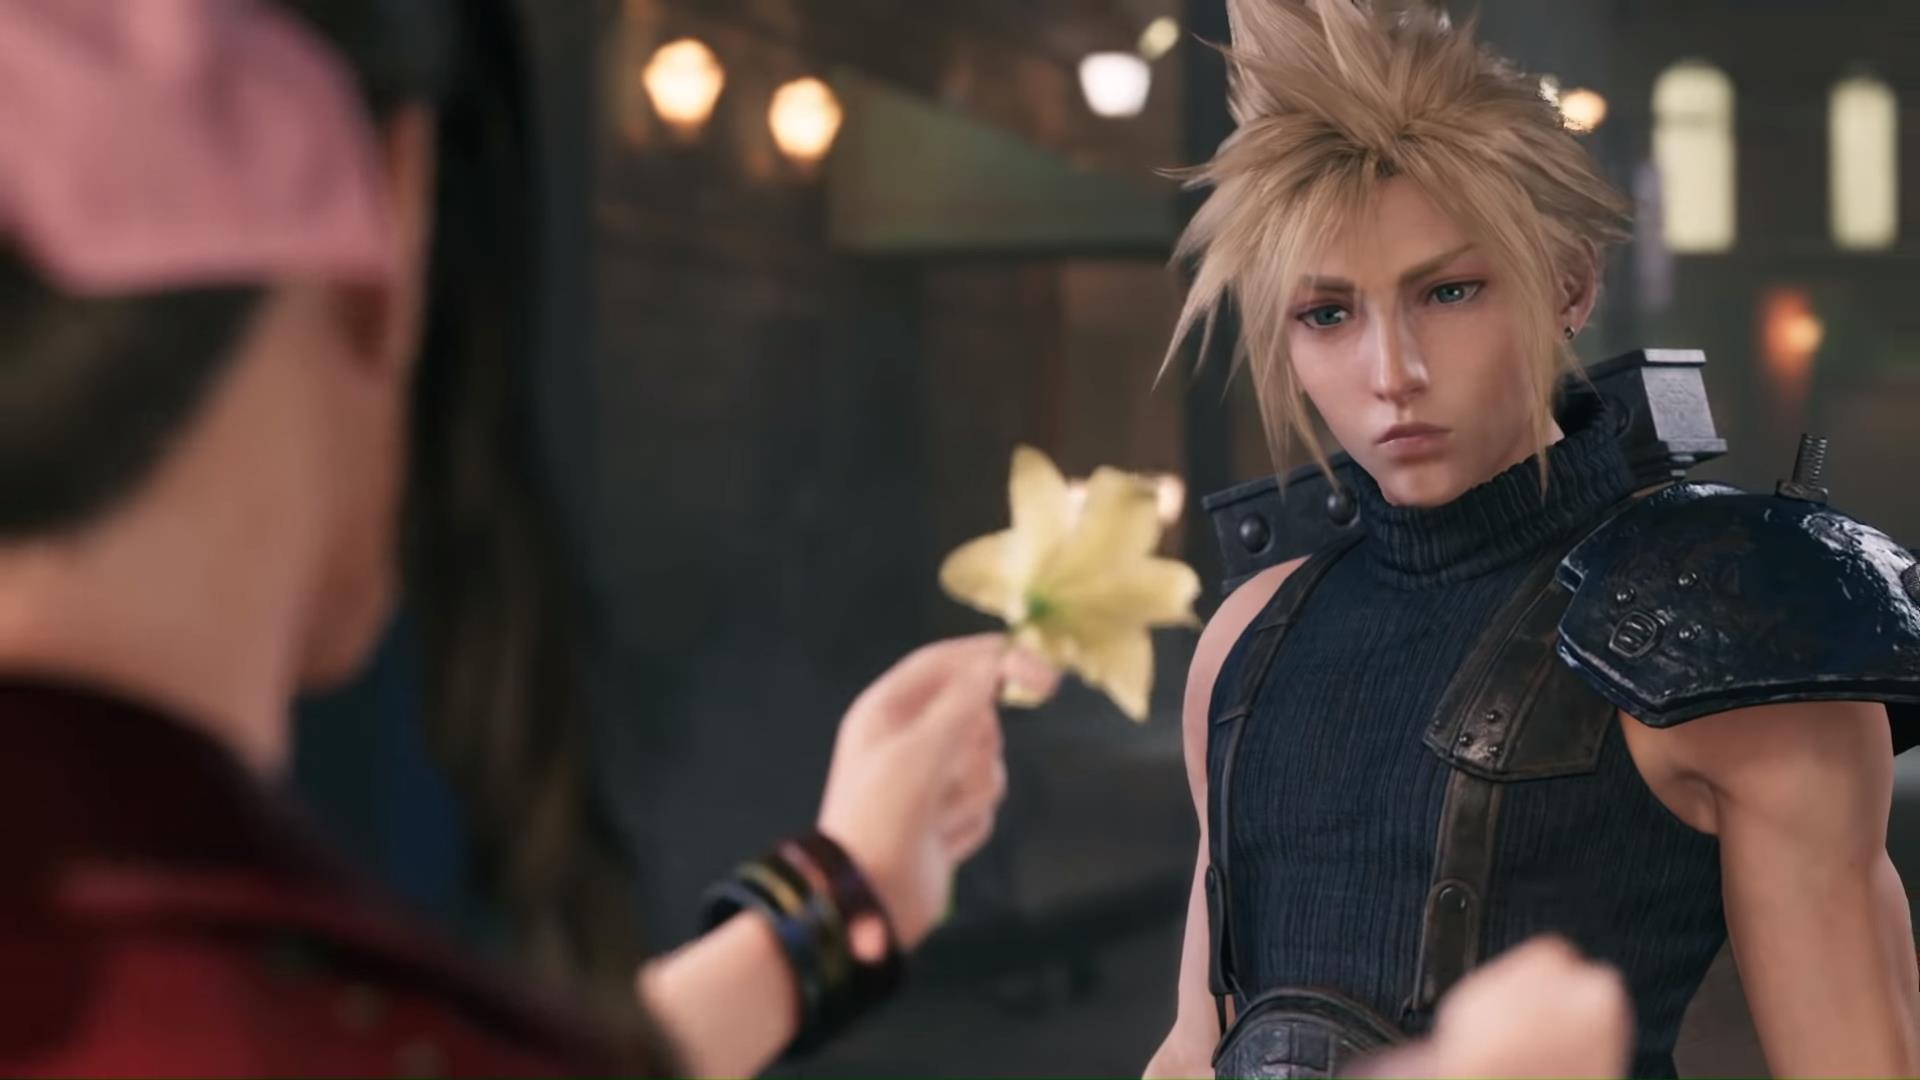 Is Final Fantasy 7 Remake On Xbox?